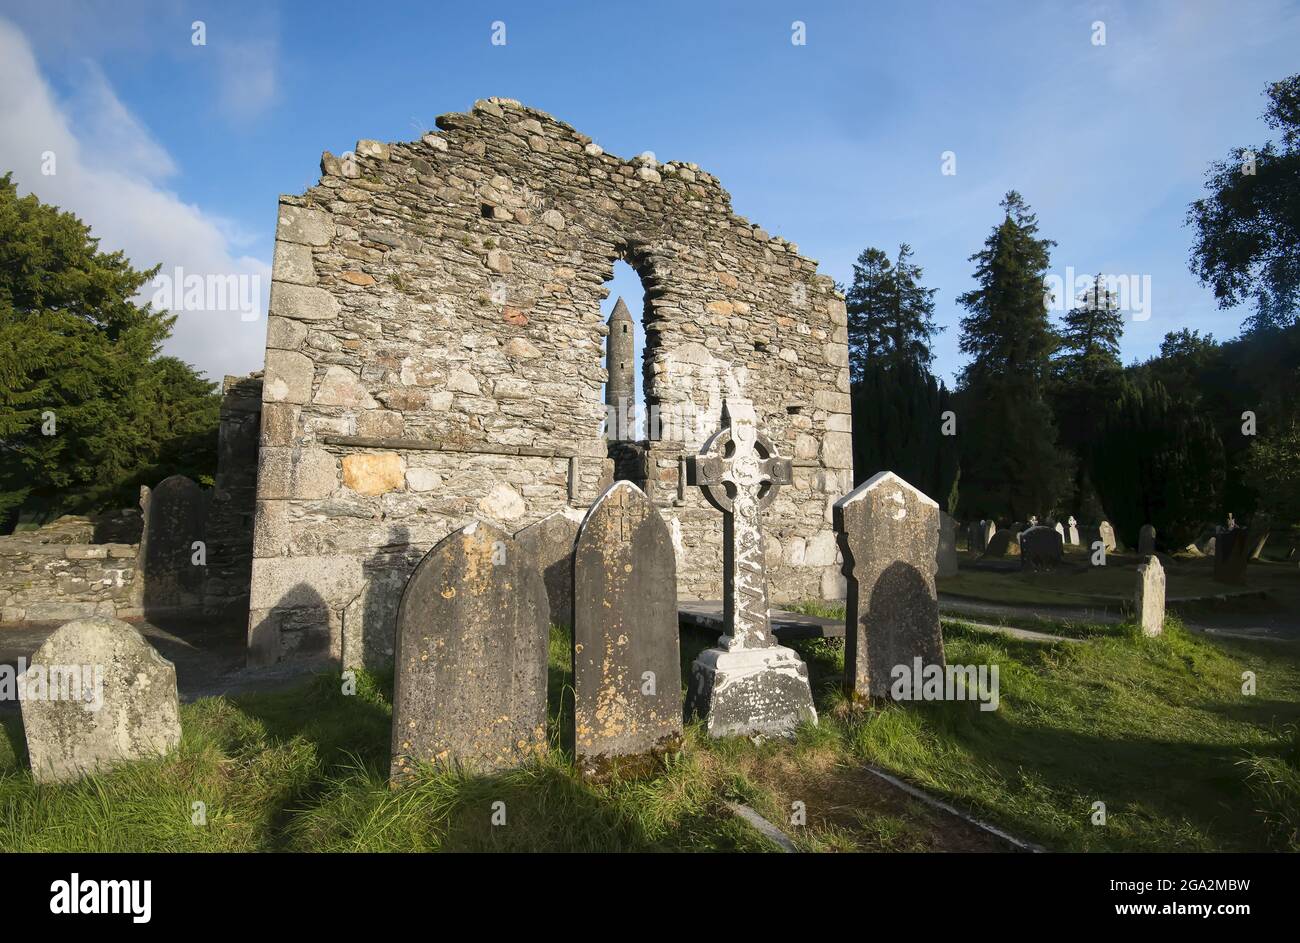 Tombstones and Celtic Cross memorial with the Round Tower seen through the lancet window of the ruins at Glendalough (or The valley of the Two Lake... Stock Photo